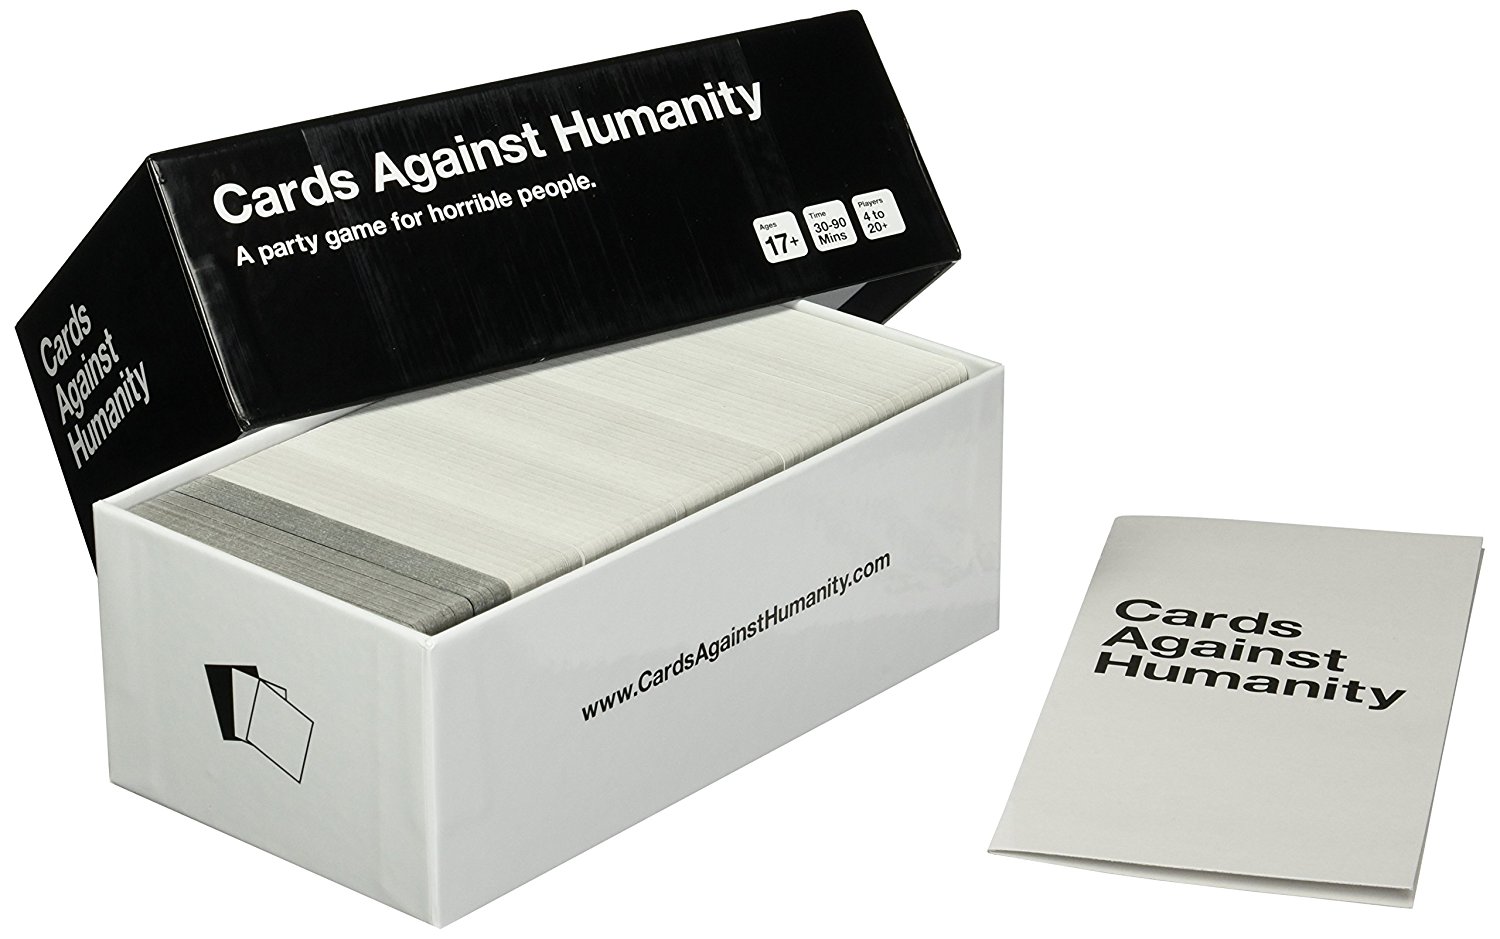 Cards Against Humanity.